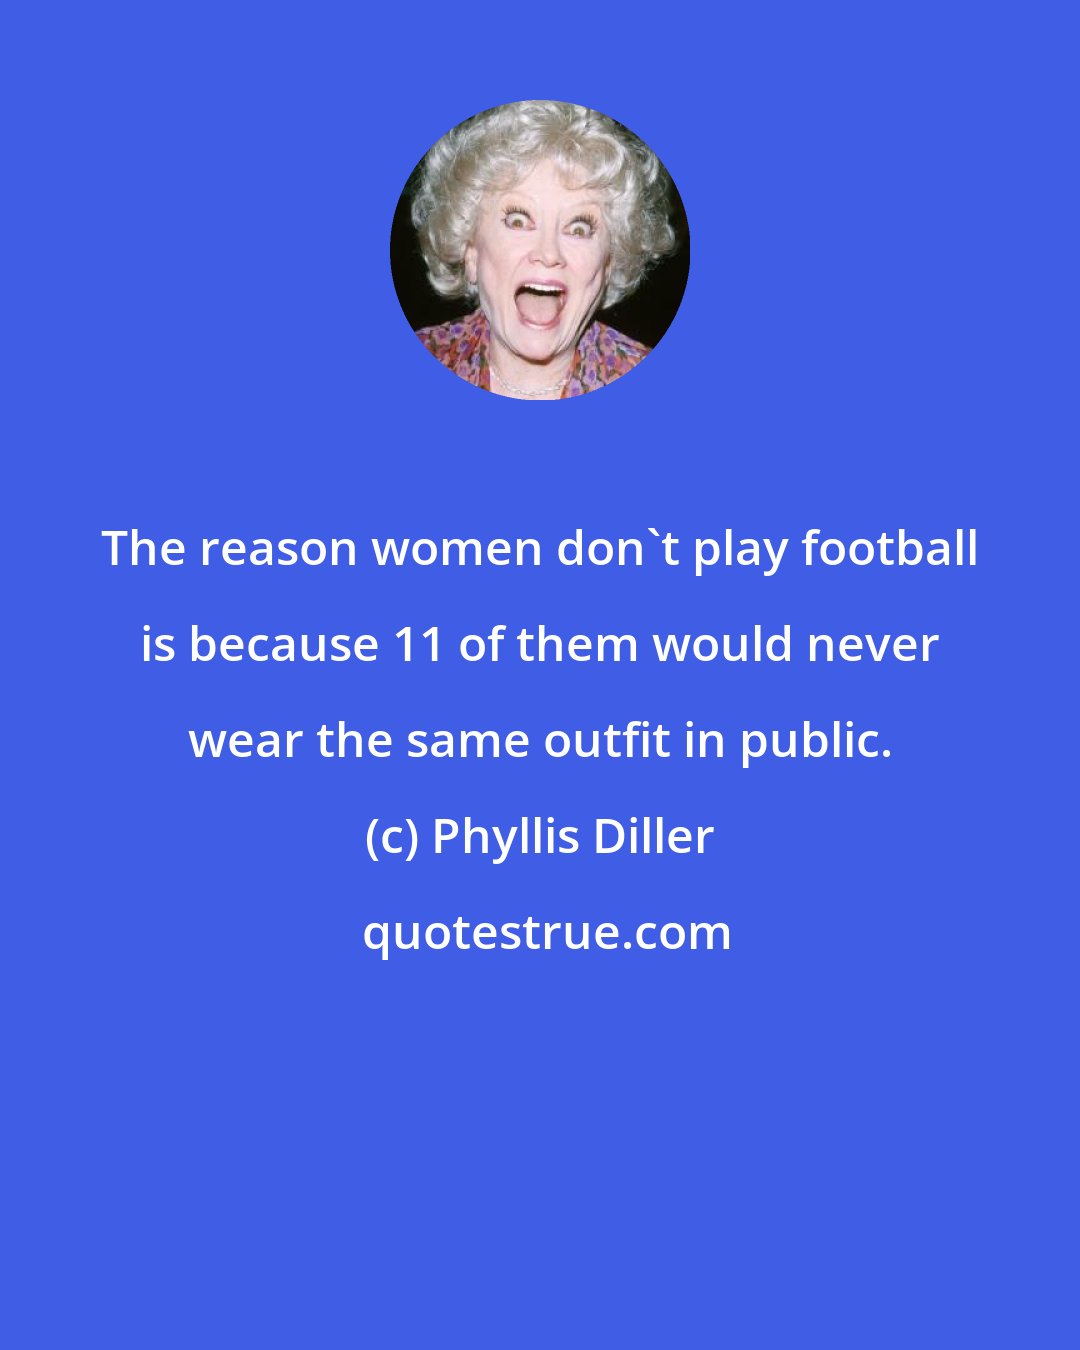 Phyllis Diller: The reason women don't play football is because 11 of them would never wear the same outfit in public.